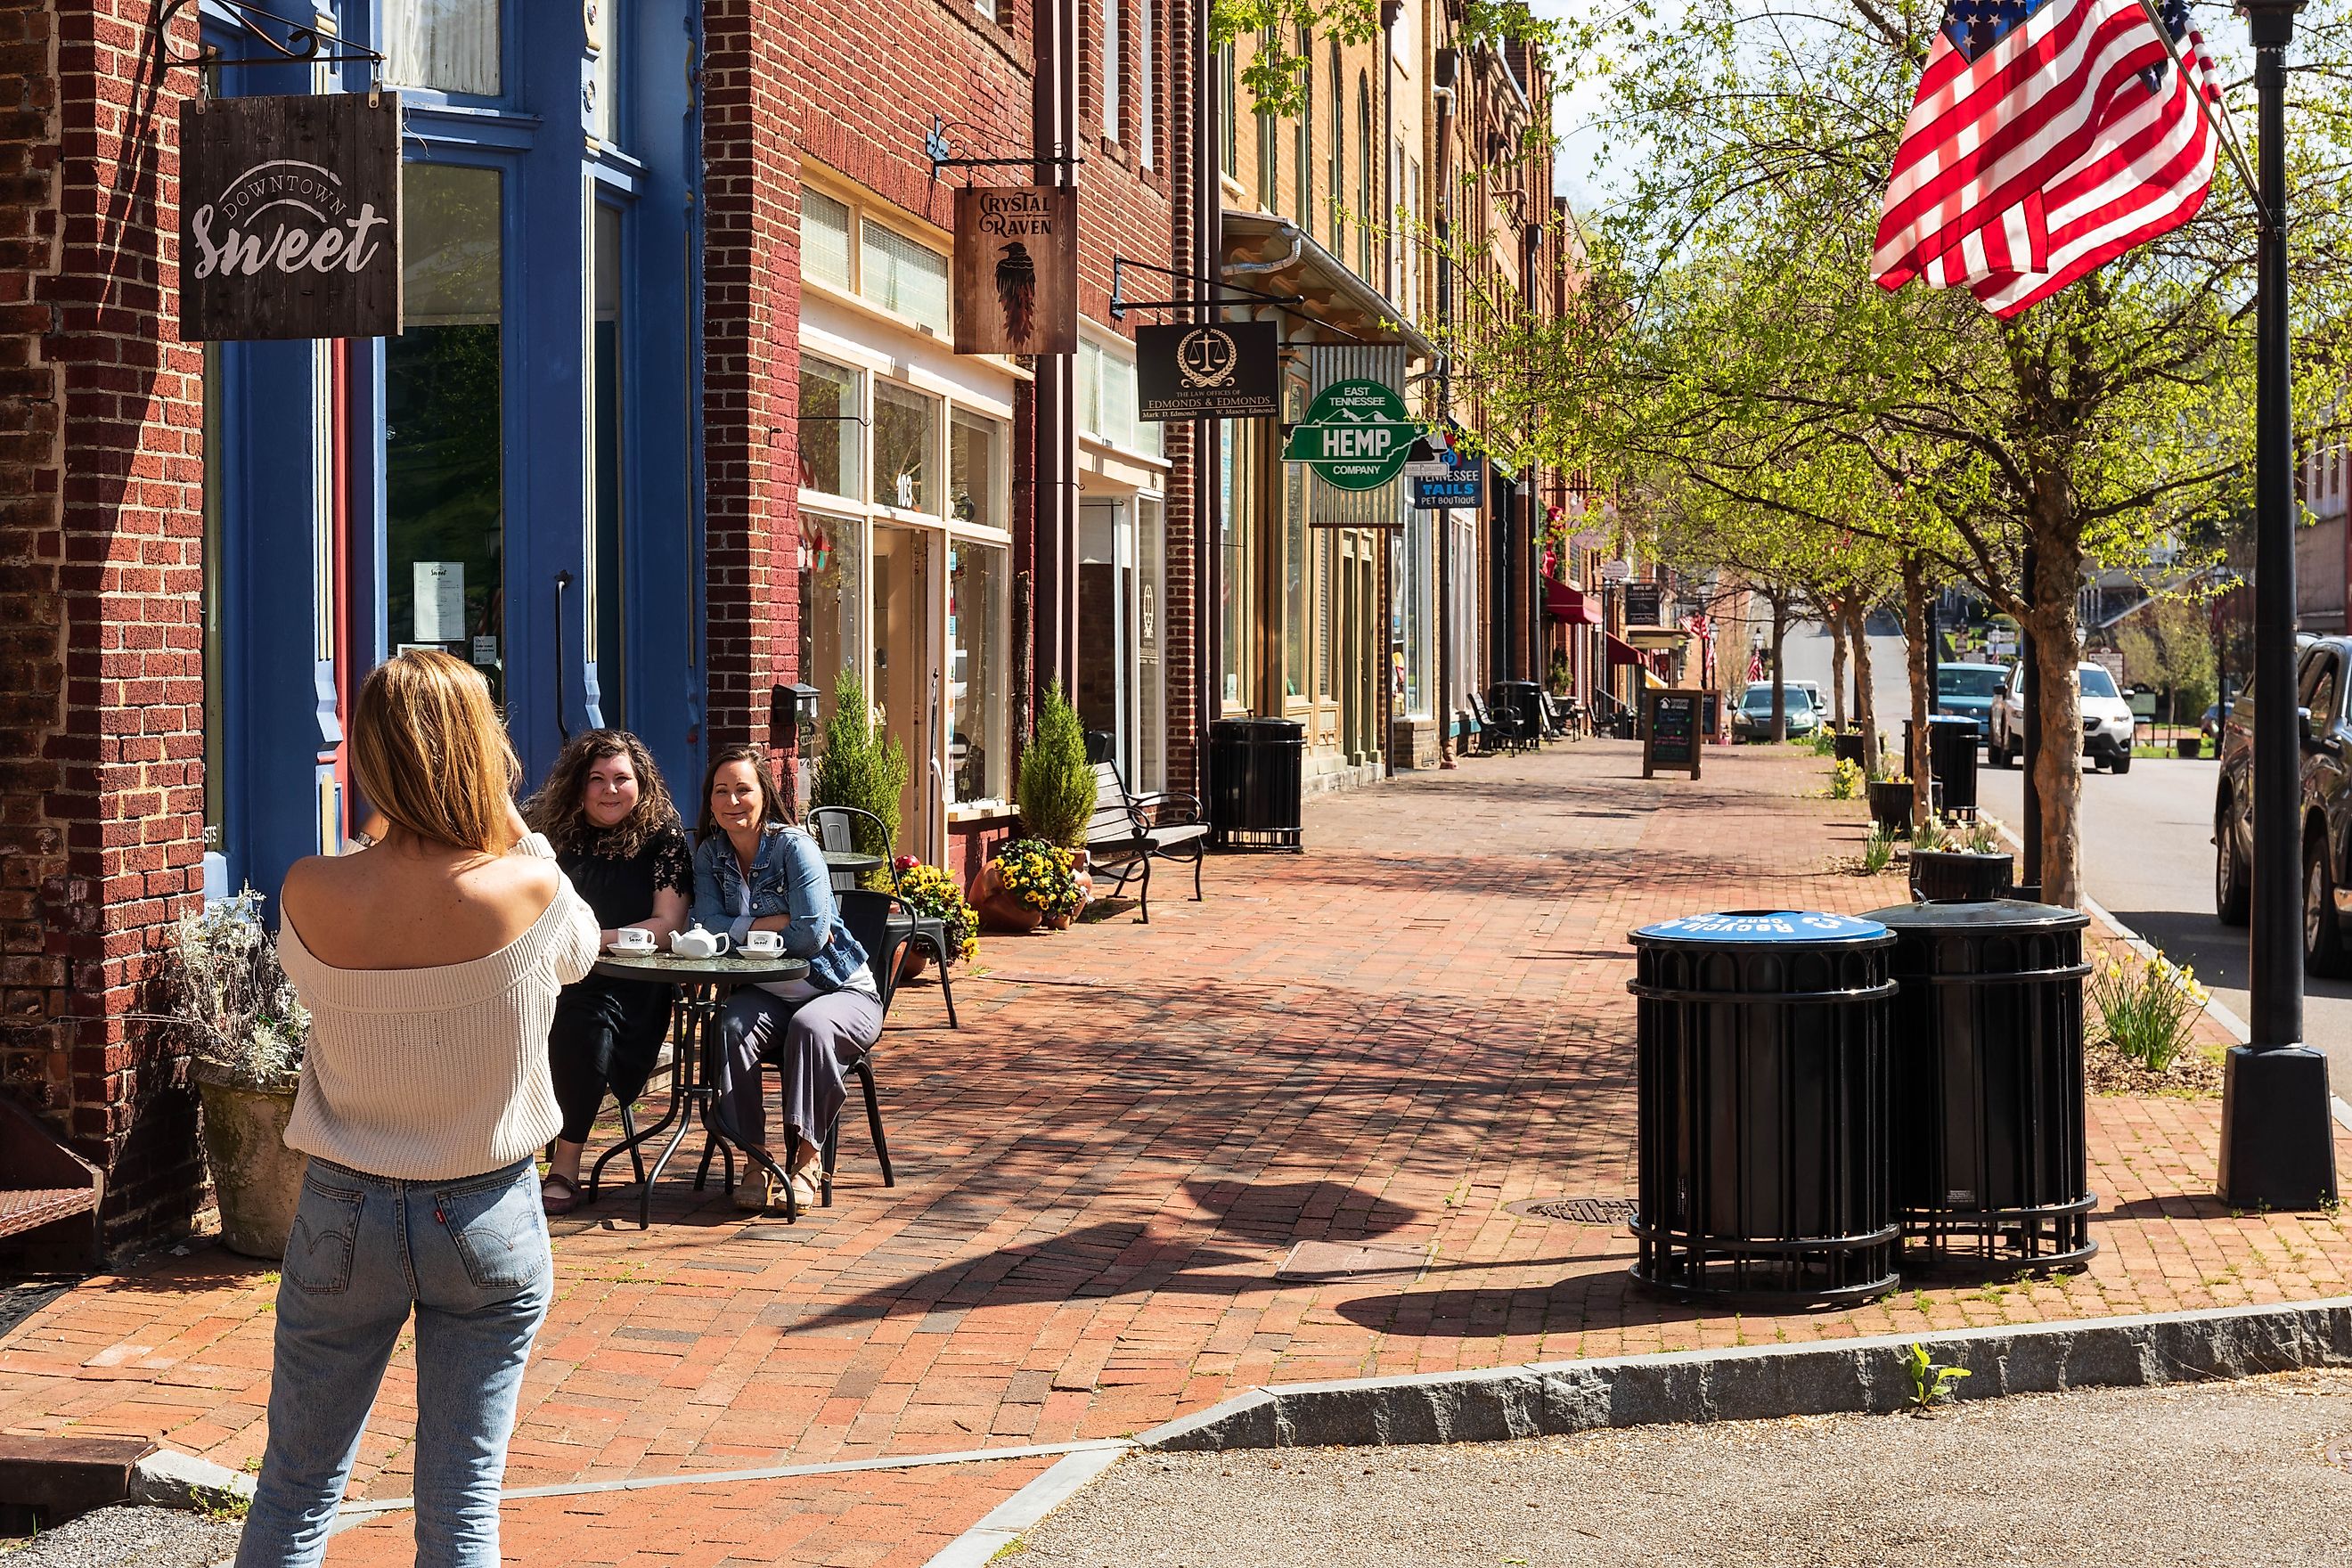 A thin, blonde woman with her back to the camera takes a picture of two friends seated at a sidewalk table in front of the 'Downtown Sweet' coffee shop, Jonesborough, Tennessee, USA. Editorial credit: Nolichuckyjake / Shutterstock.com